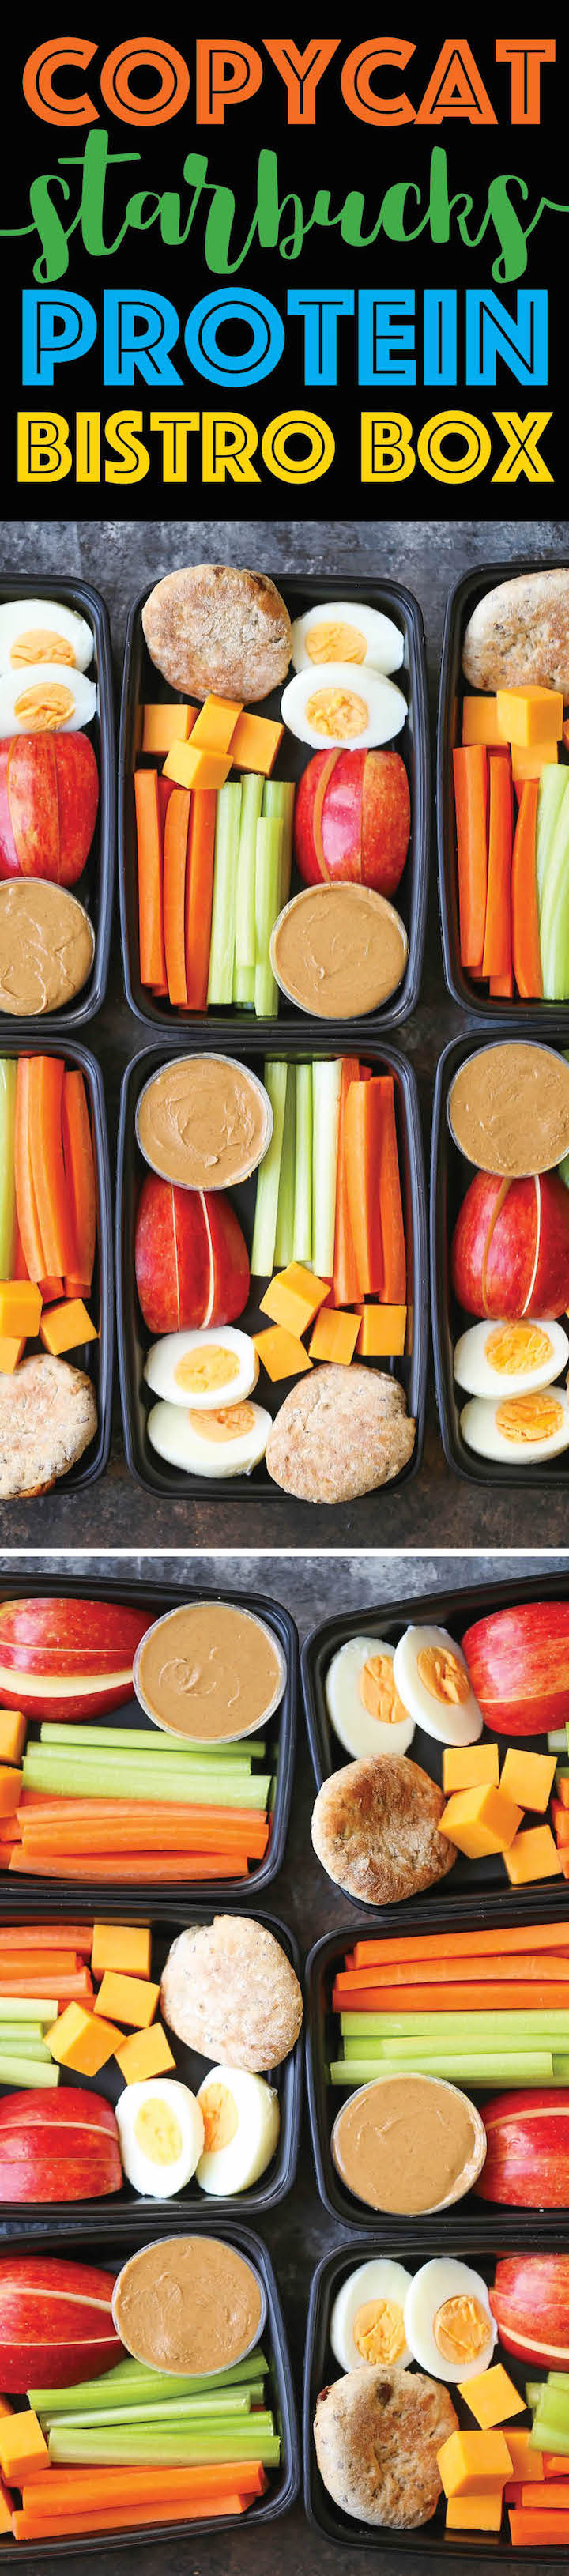 Copycat Starbucks Protein Bistro Box - Now you can easily make your own snack boxes! Healthy, nutritious and prepped for lunch or post-workout snacks!